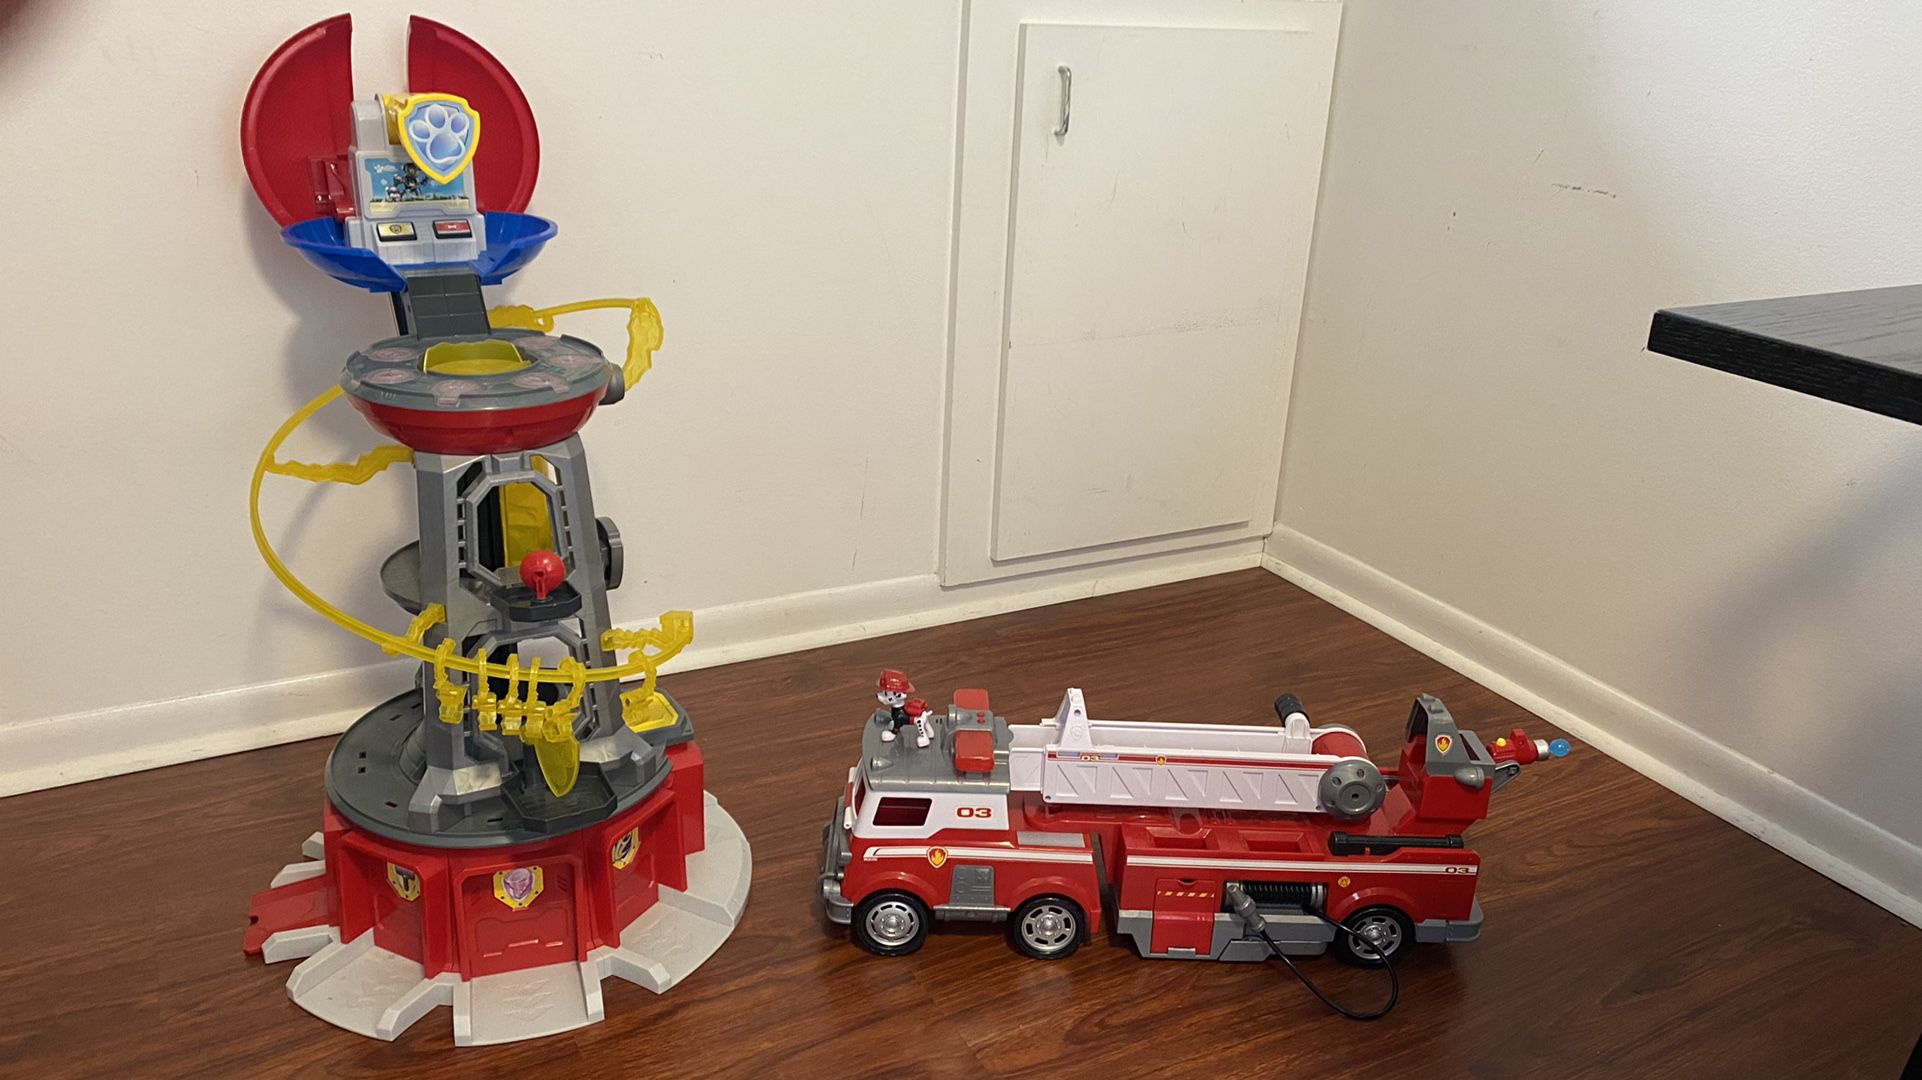 Paw Patrol Toy Lot Lookout Tower Ultimate Rescue Fire Truck & More! SEE PHOTOS!